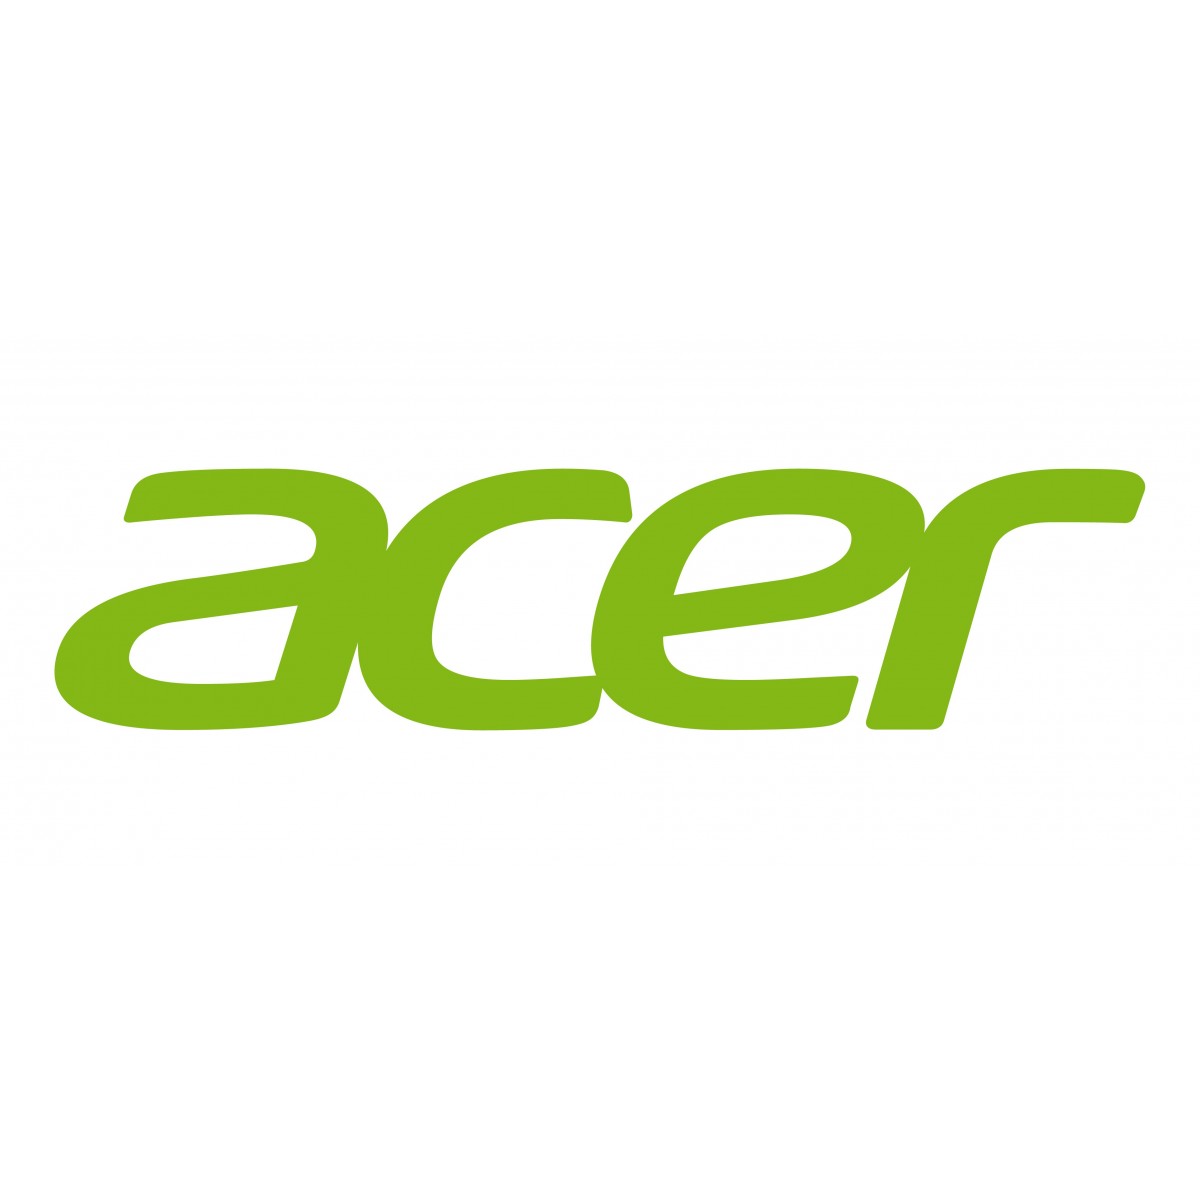 Acer UC.JRN11.001 - UHP - 245 W - 3500 h - Acer - H6522BD